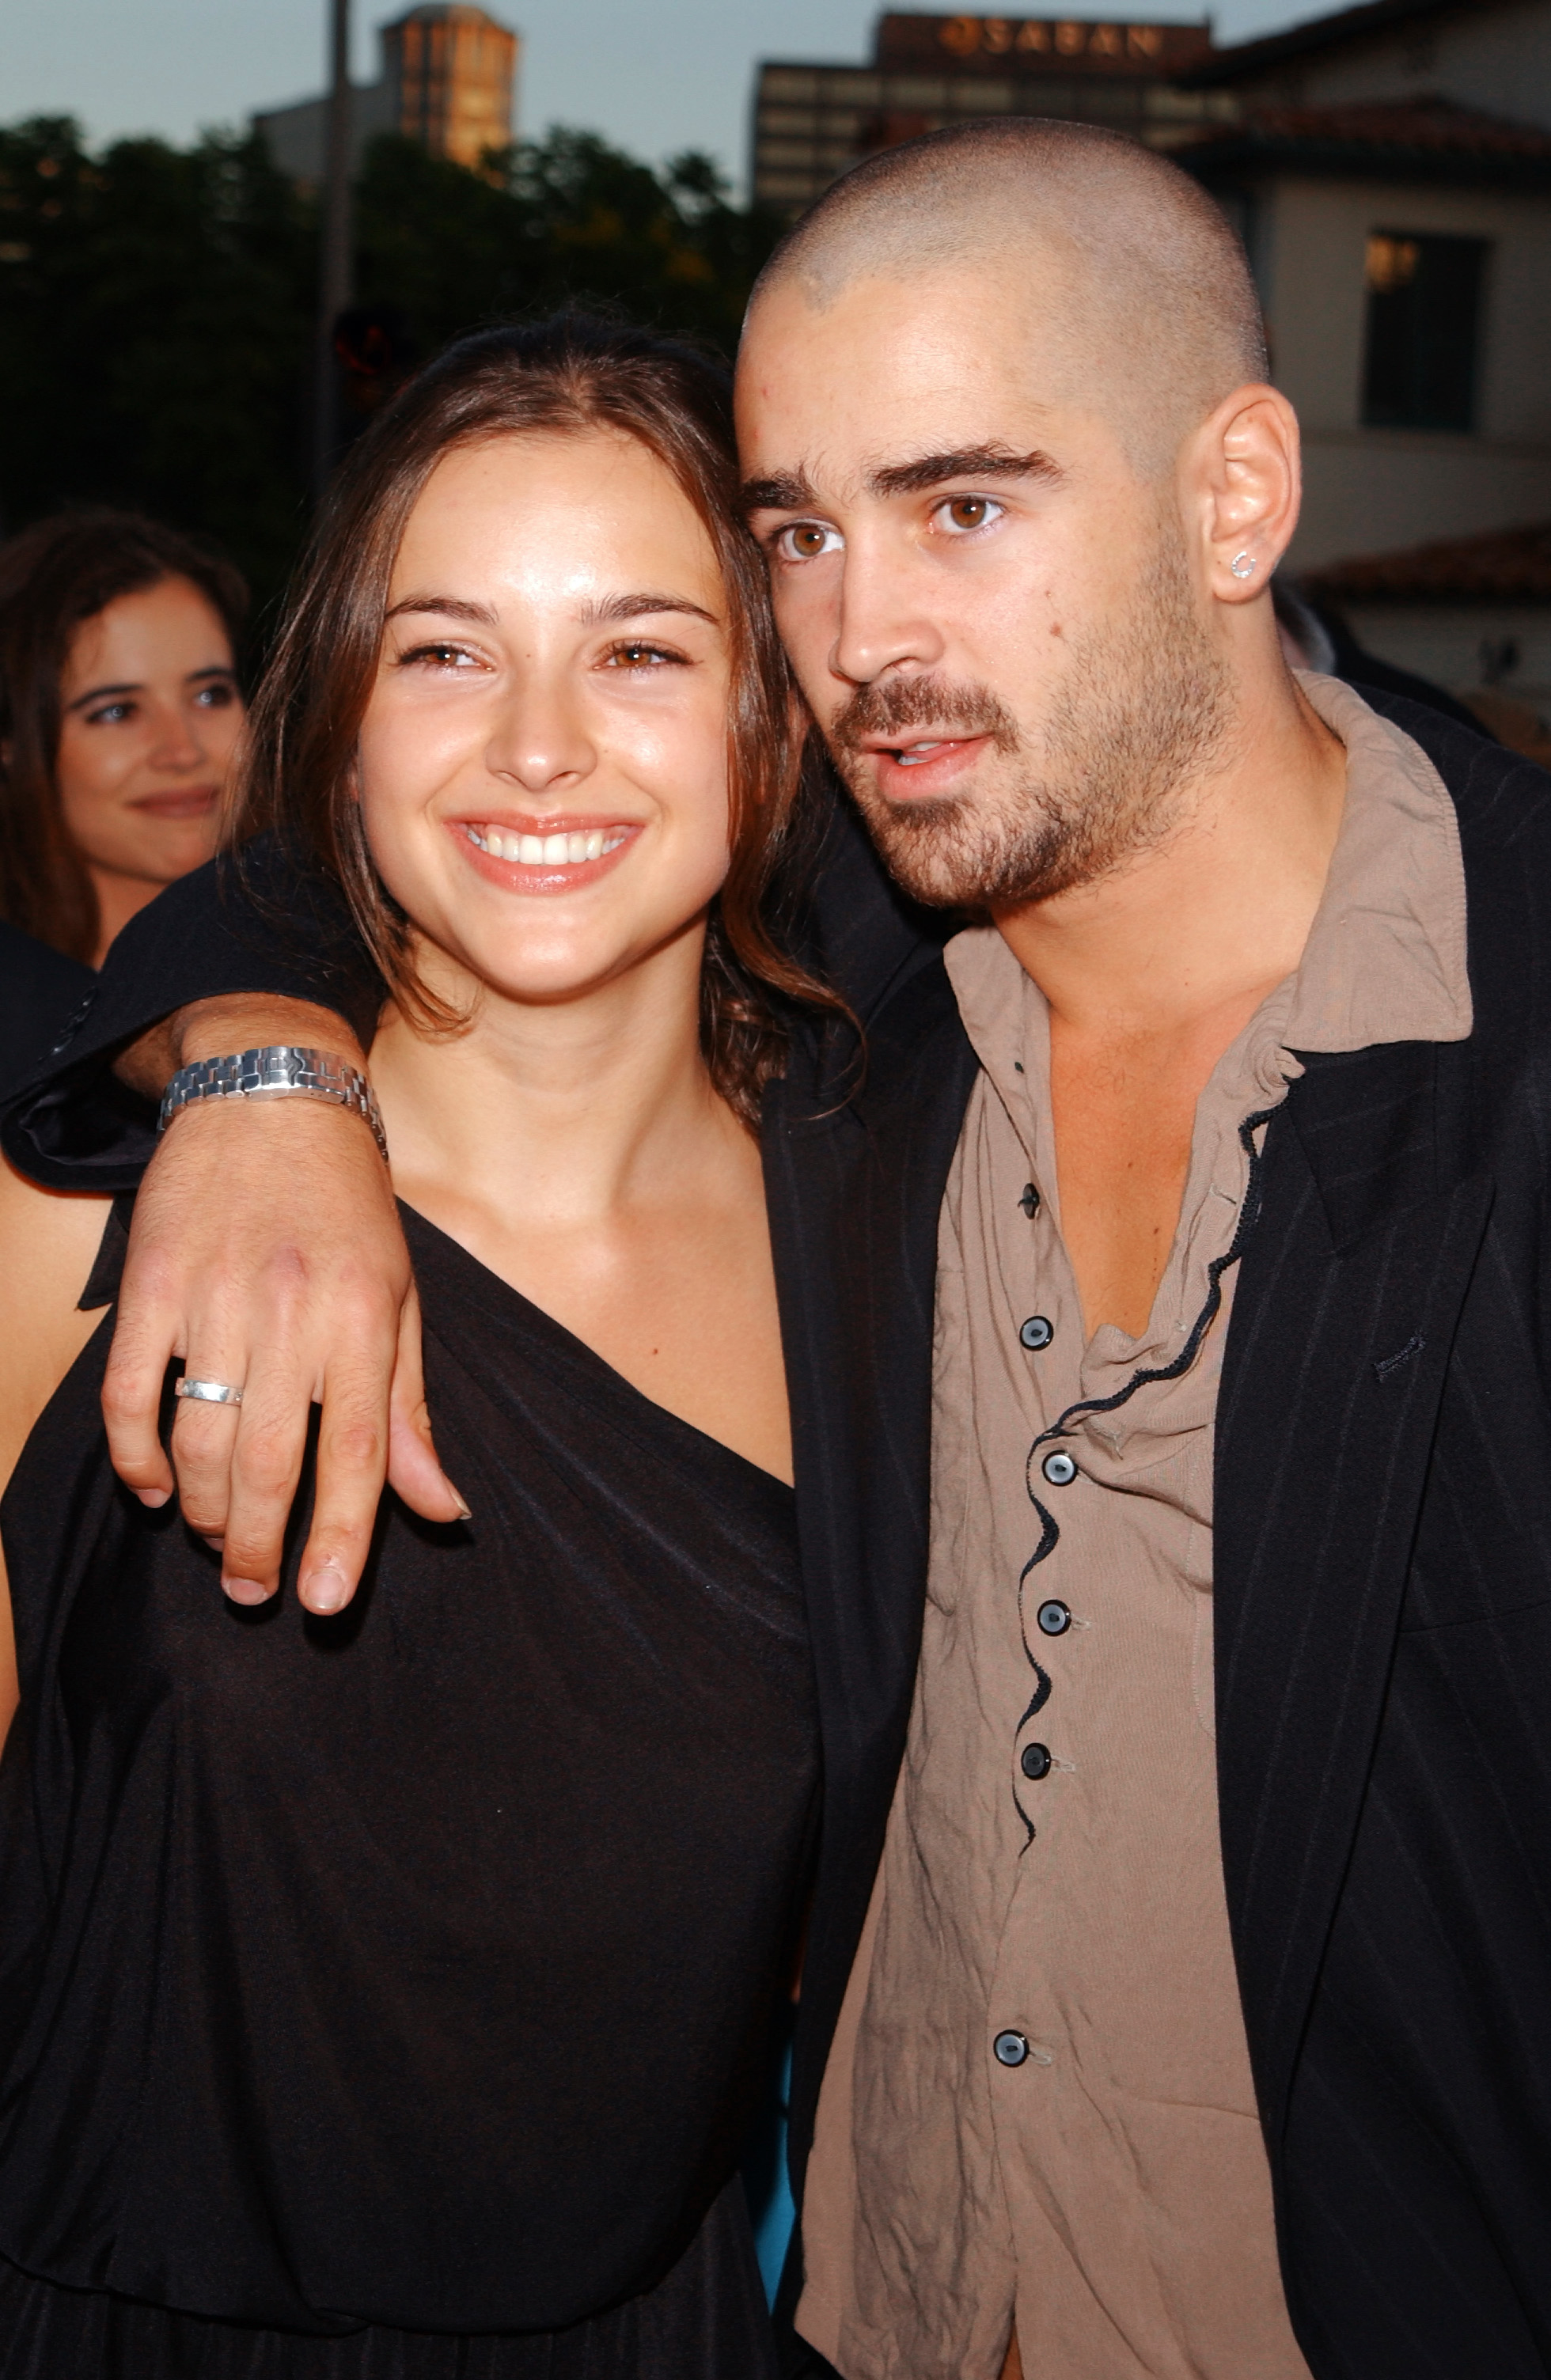 Colin Farrell and Amelia Warner on the red carpet